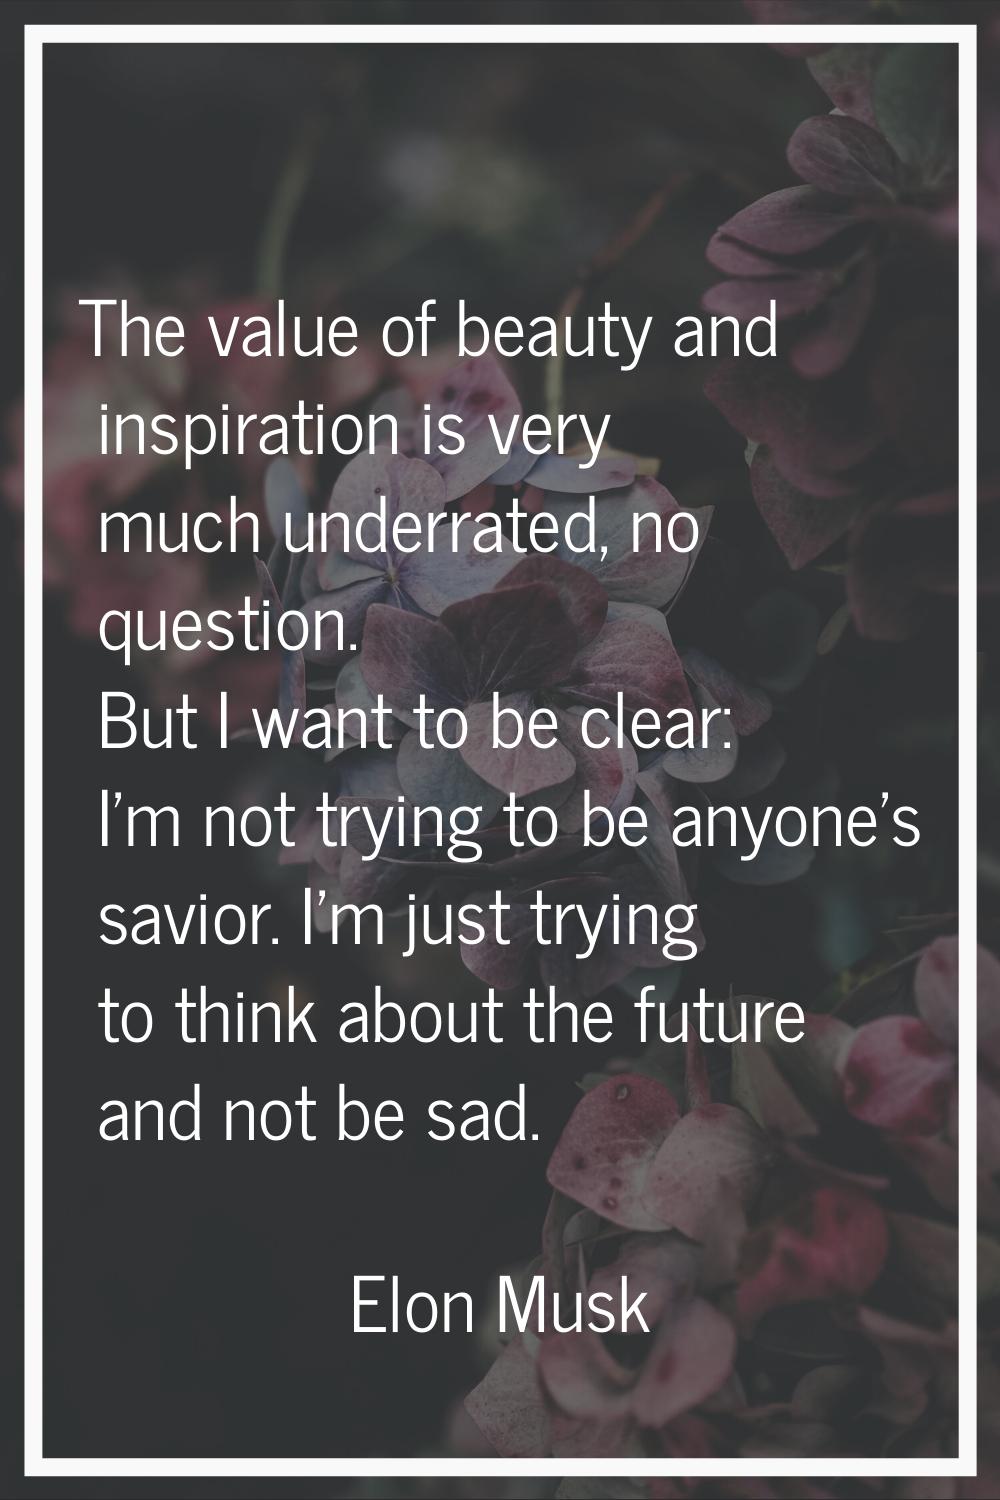 The value of beauty and inspiration is very much underrated, no question. But I want to be clear: I